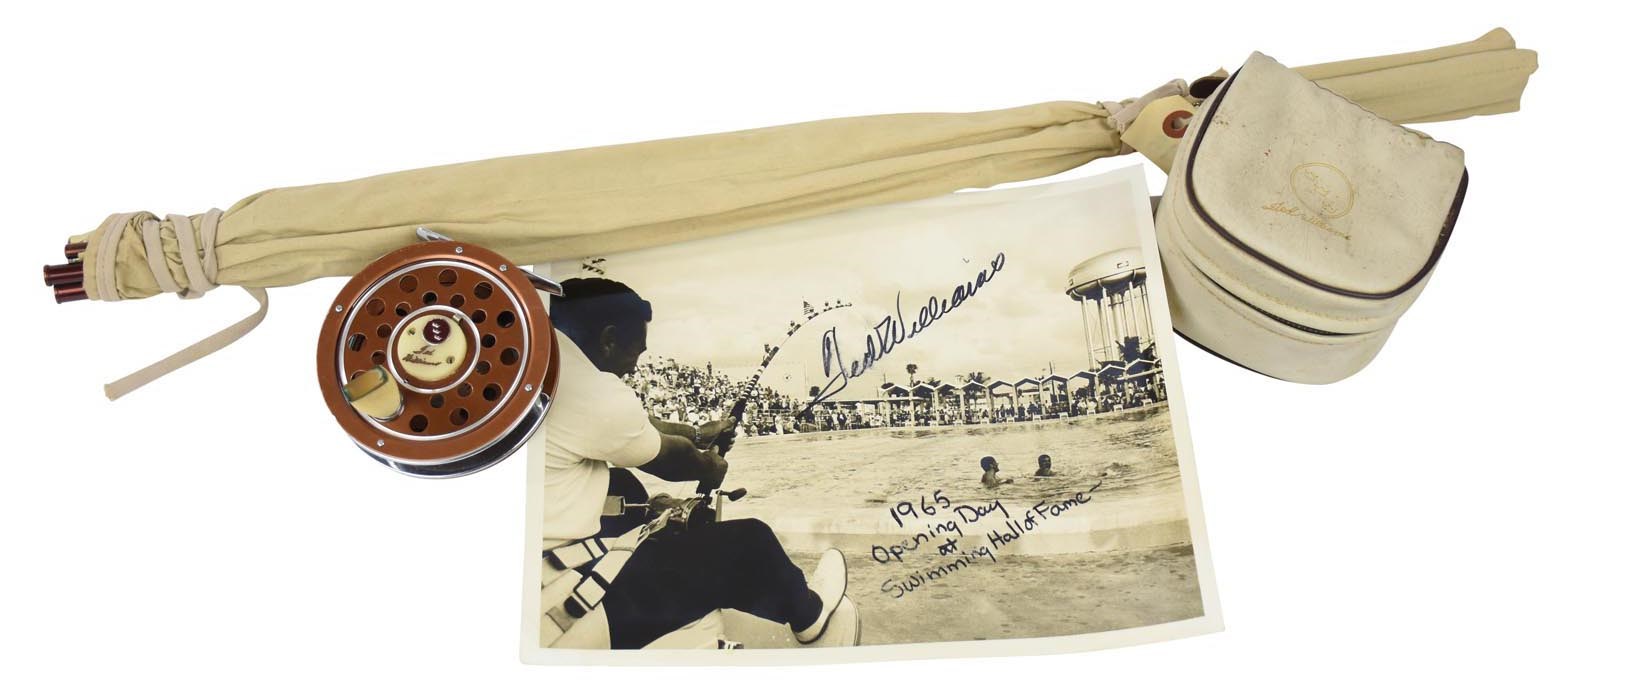 Boston Sports - Ted Williams Personally Used Fly Rod and Reel (ex-Ted Williams Museum)